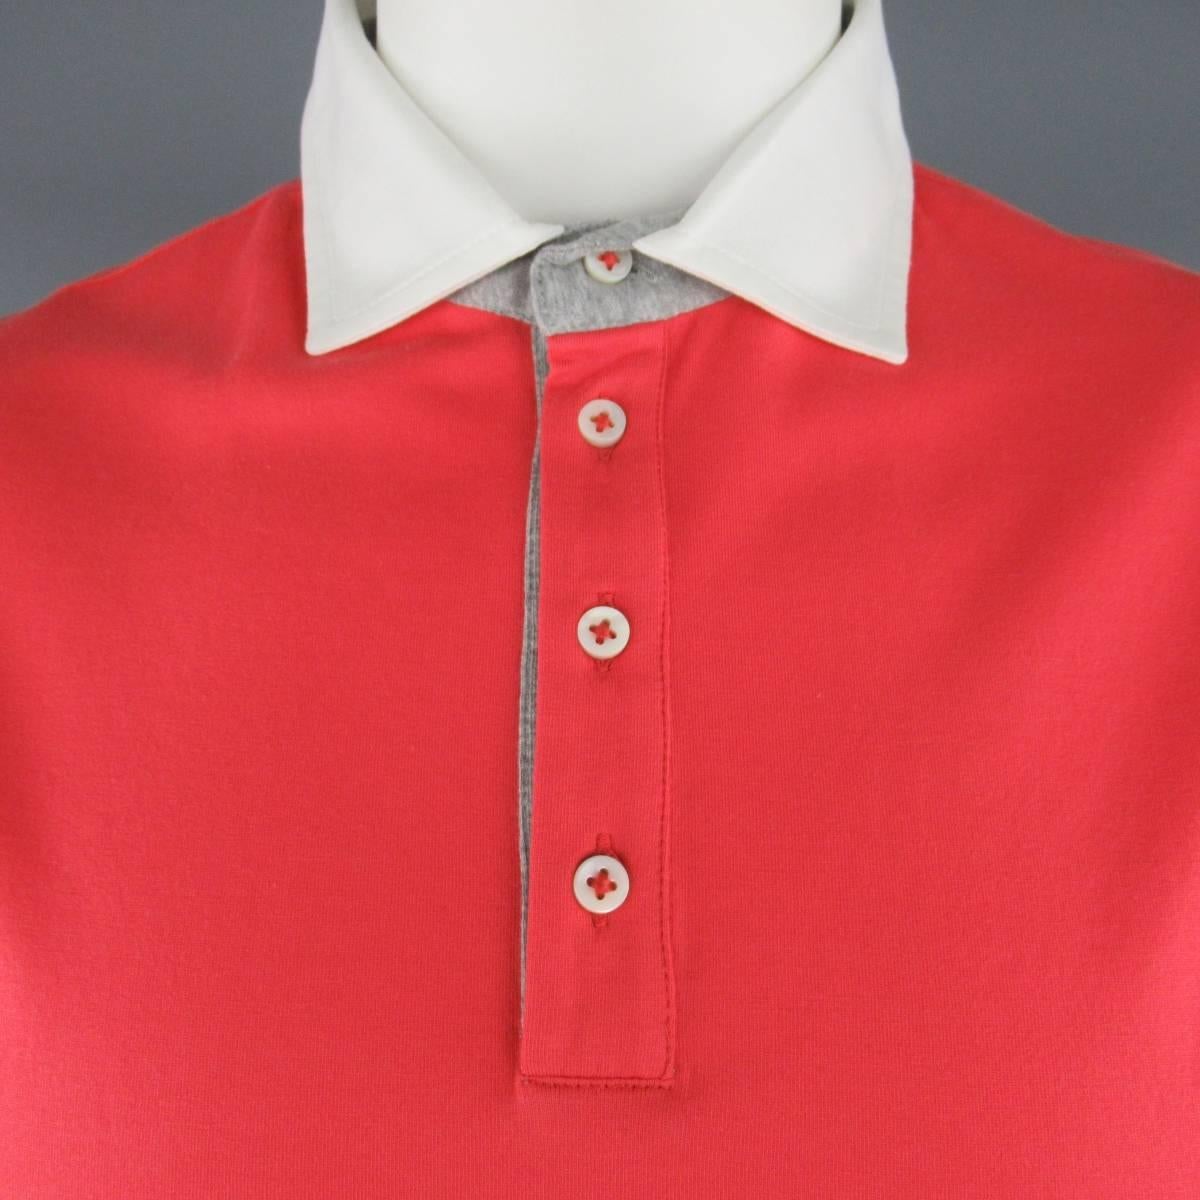 BRUNELLO CUCINELLI polo comes in a brilliant salmon coral red color cotton jersey featuring a white contrast collar with heather gray trim. Made in Italy.
 
New with Tags.
Marked: 54
 
Measurements:
 
Shoulder: 19 in.
Chest: 48 in.
Sleeve: 10